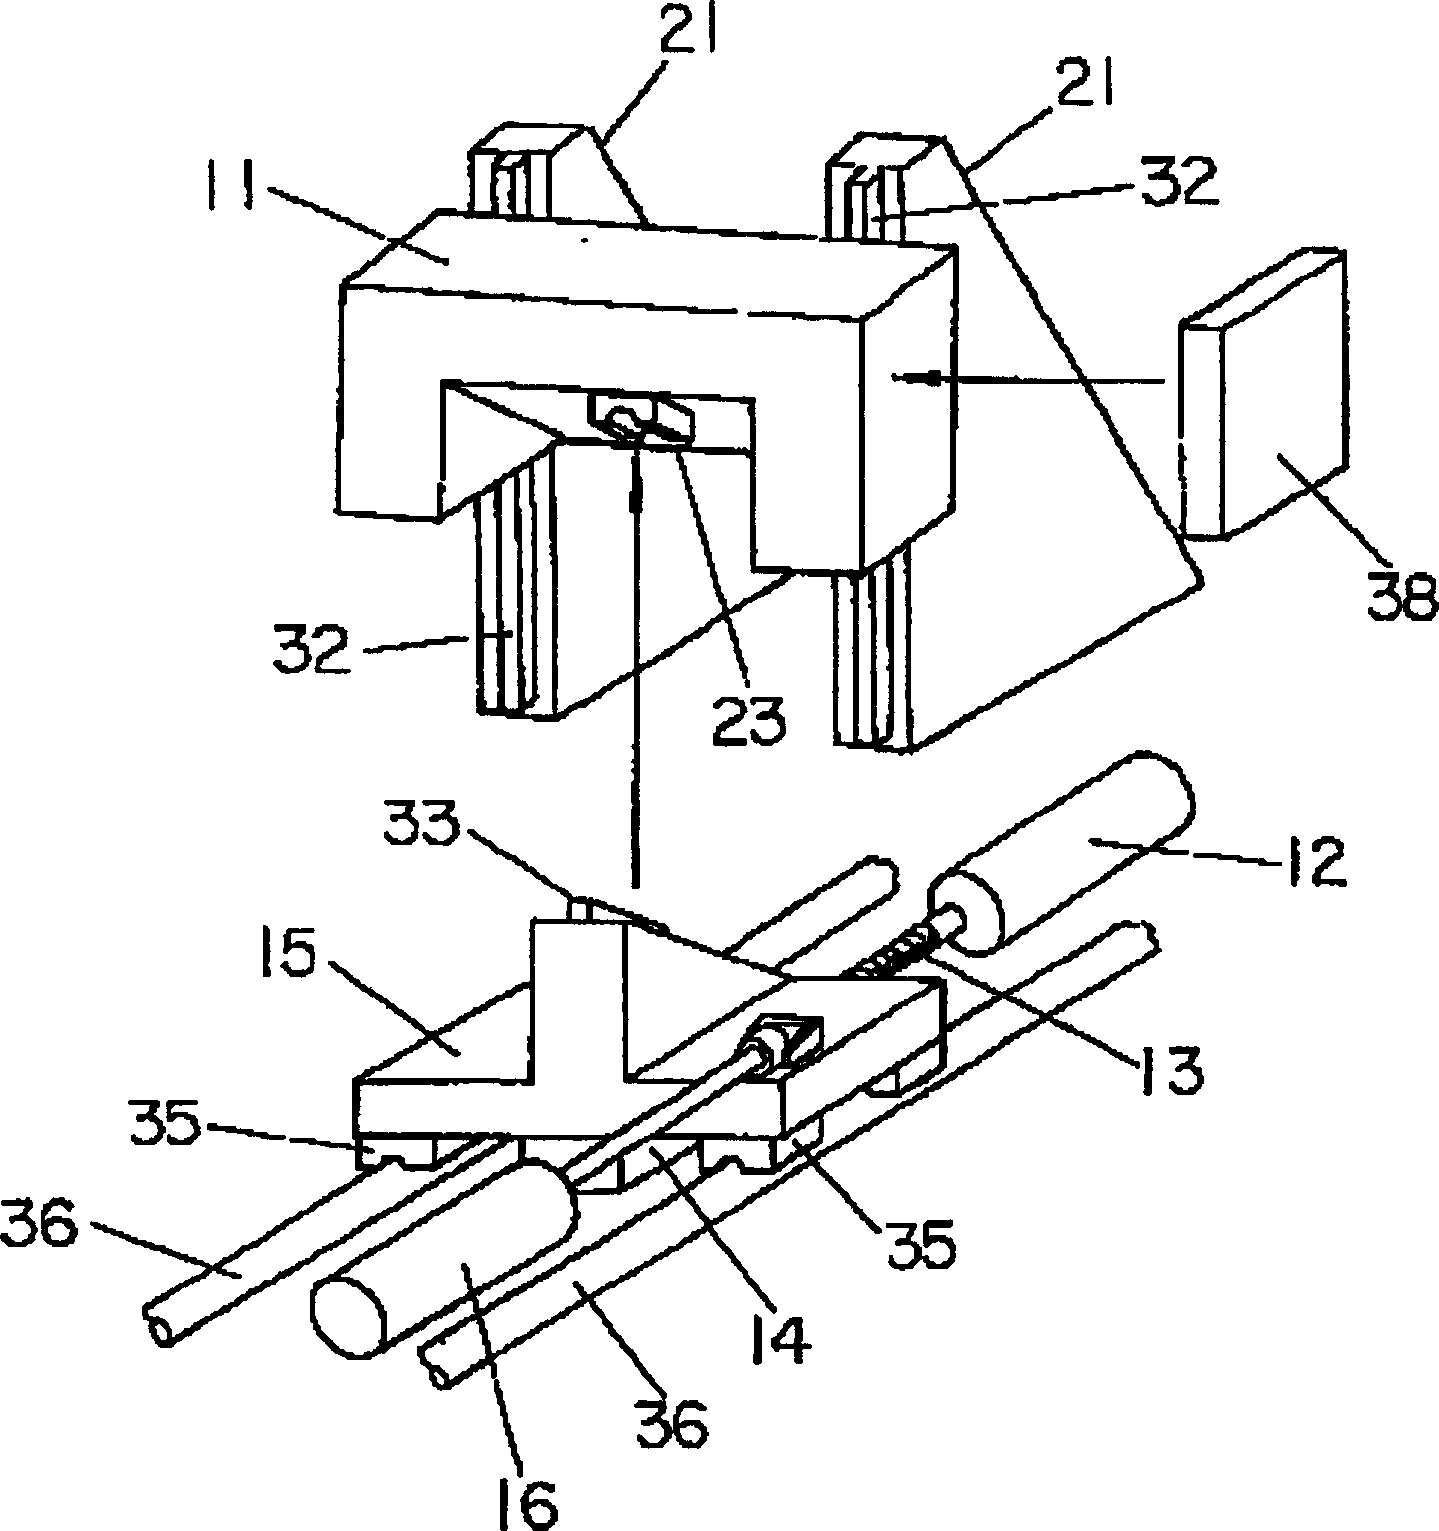 Working table device for table type applicator